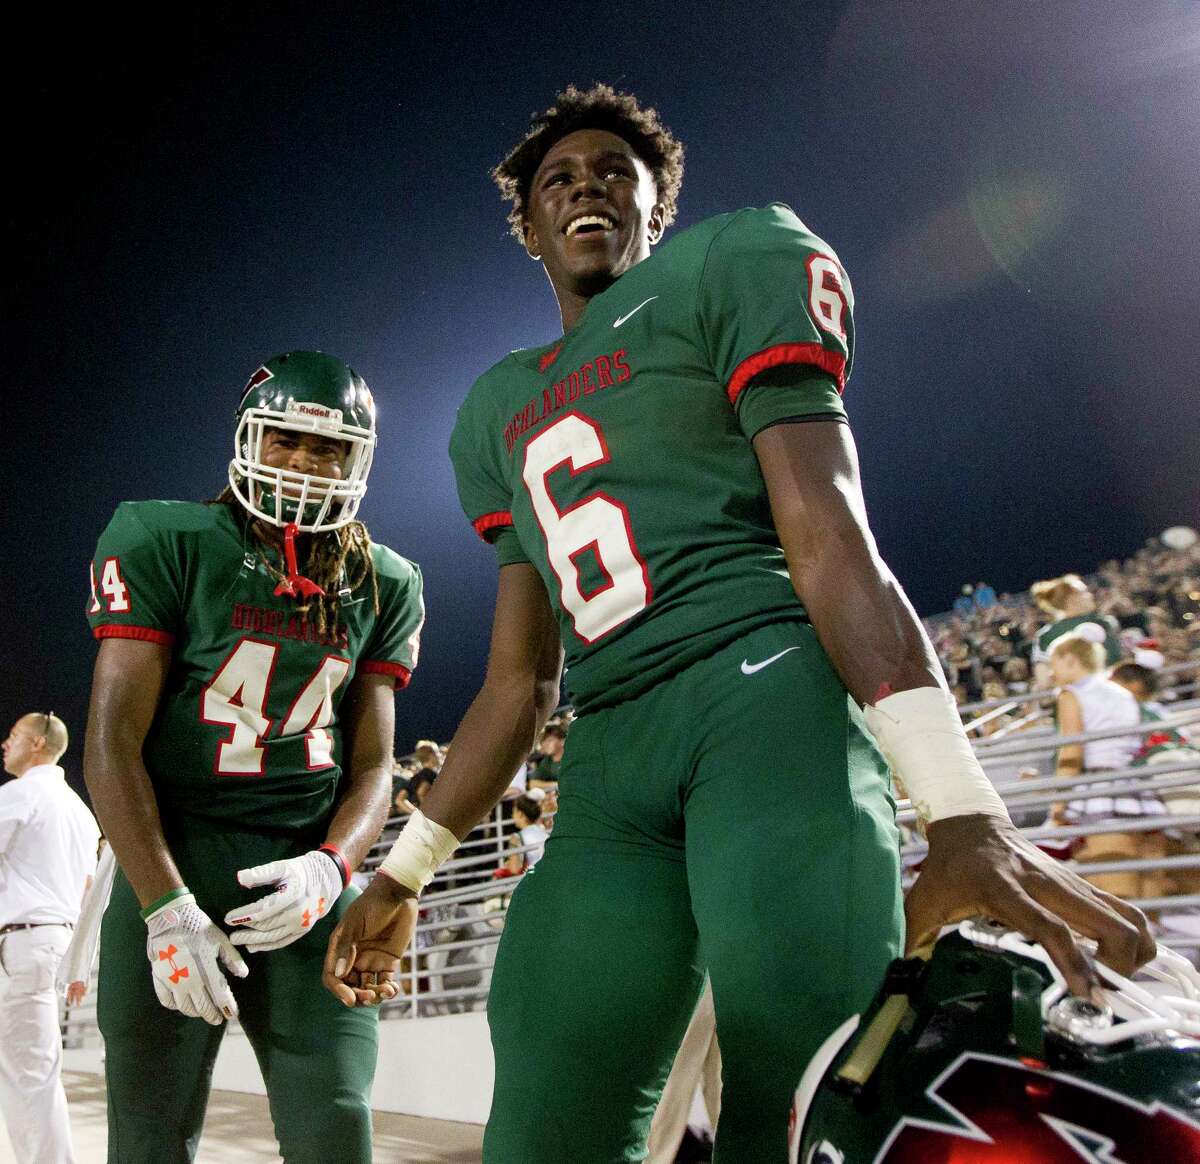 The Woodlands wide receiver Kesean Carter (6) shares a laugh with running back Jacoby Clarke (44) after scoring five touchdowns in the Highlanders' 52-12 win over George Ranch during a non-district high school football game at Woodforest Bank Stadium, Friday, Sept. 22, 2017, in Shenandoah.